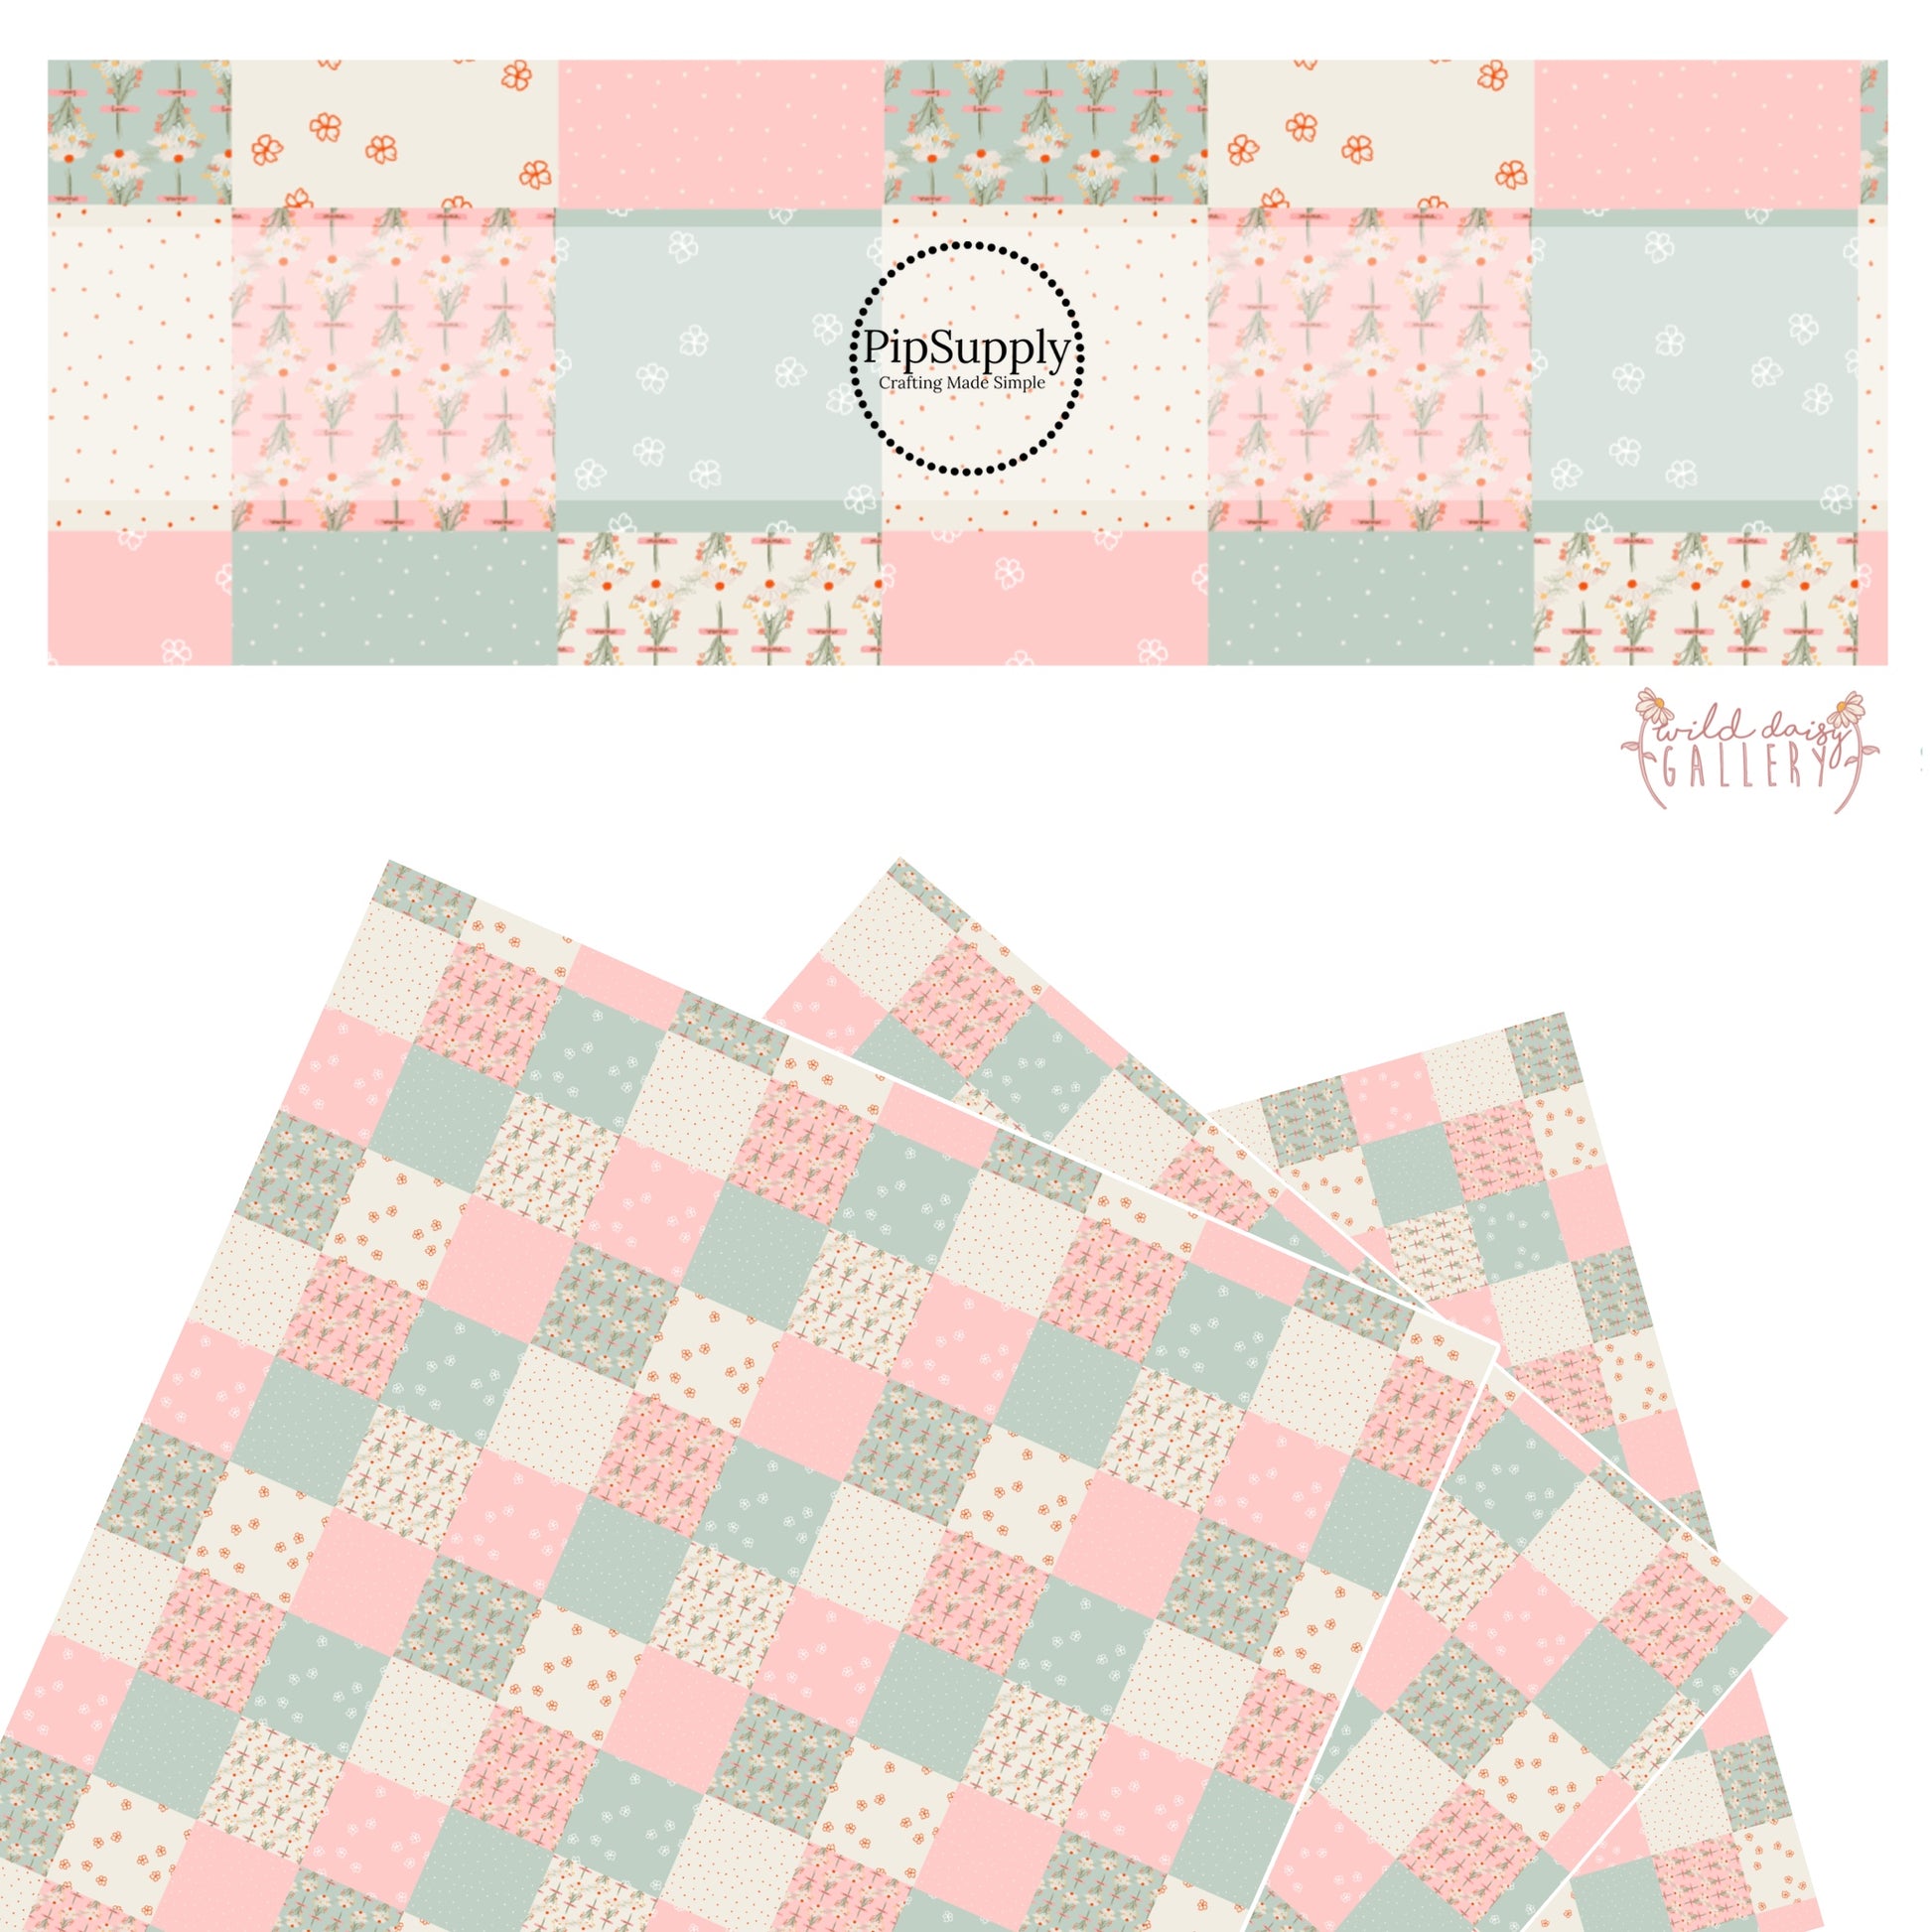 These daisy and dot spring themed light seafoam green, cream, and pink faux leather sheets contain the following design elements: patchwork with daisy bouquets, outlined daisies, and small scattered dots. 